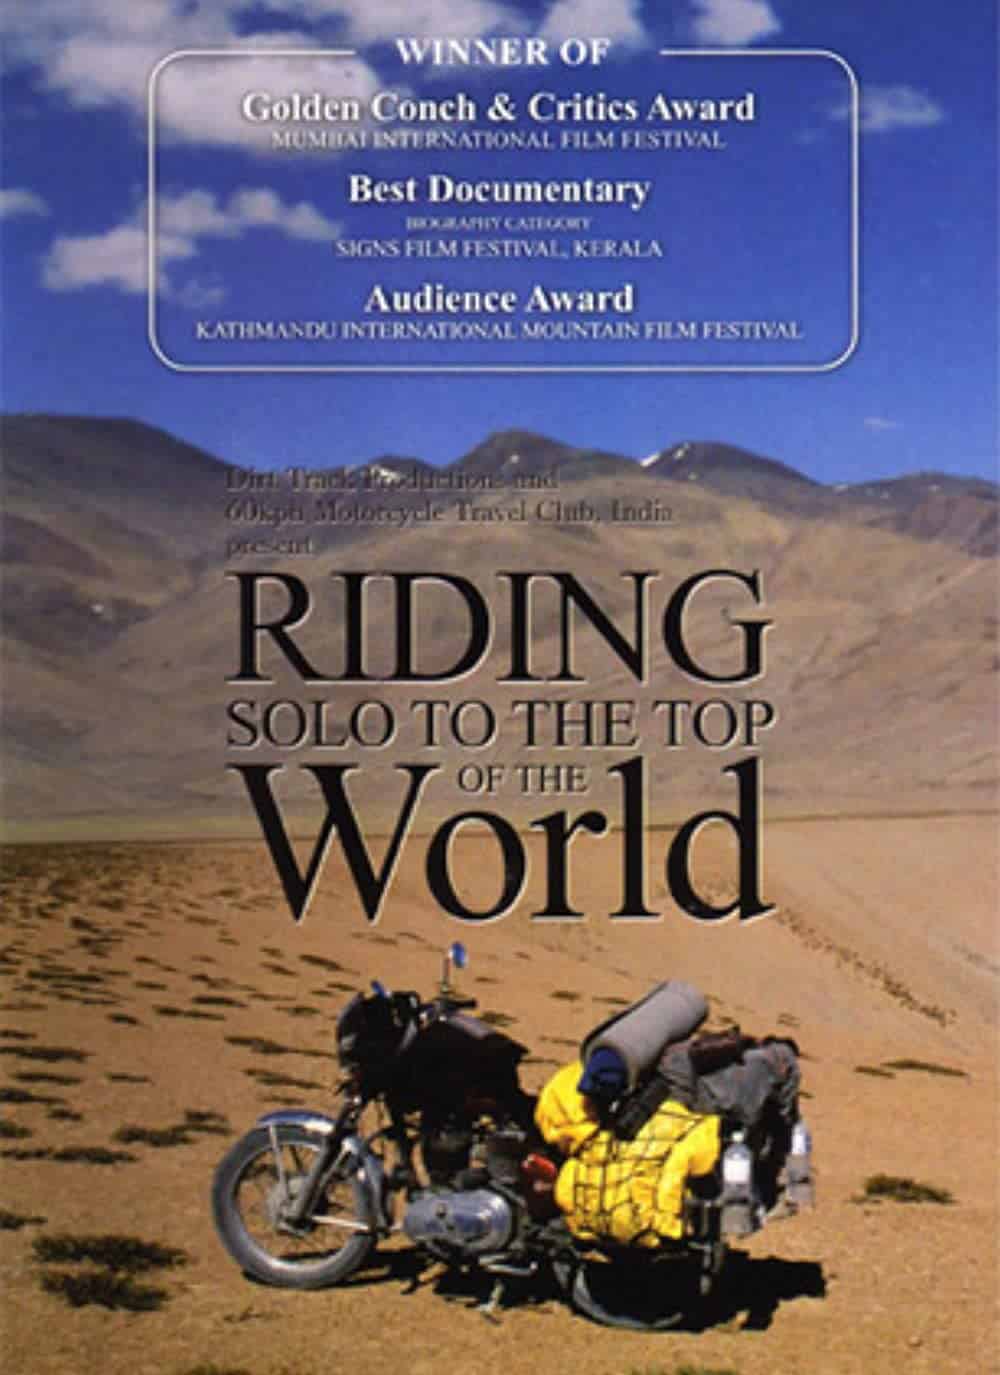 Riding Solo to the Top of the World (2006)